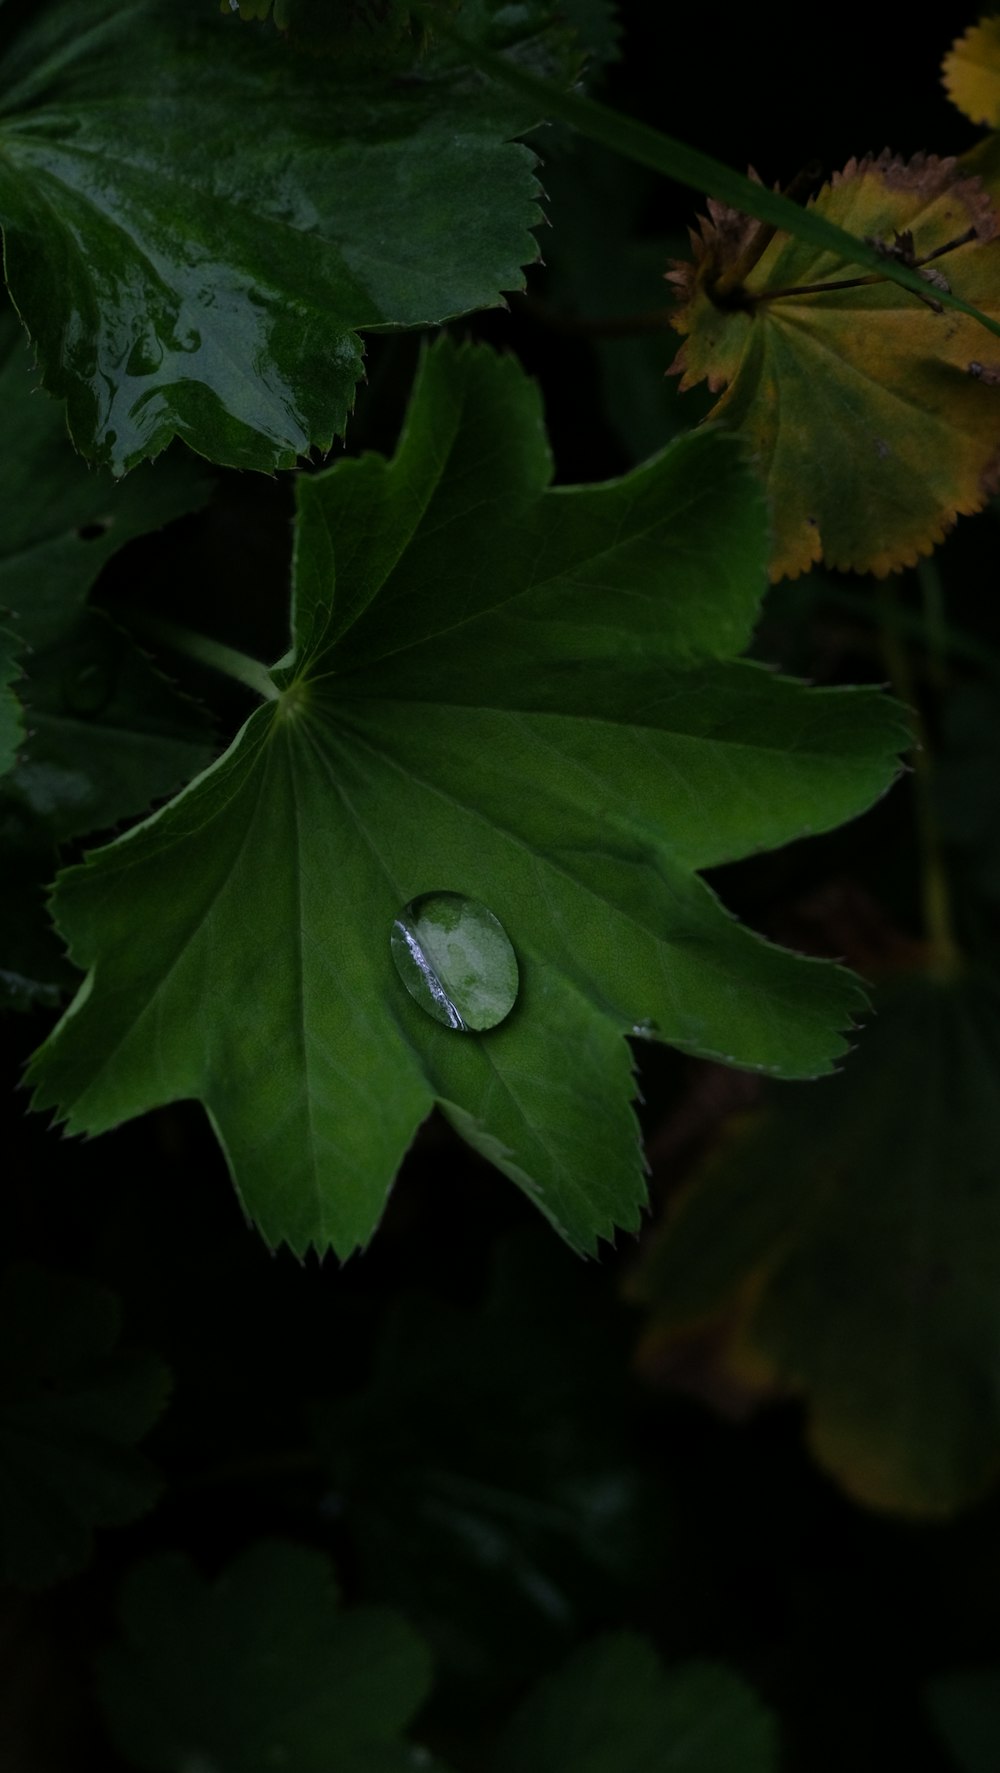 a leaf with a drop of water on it